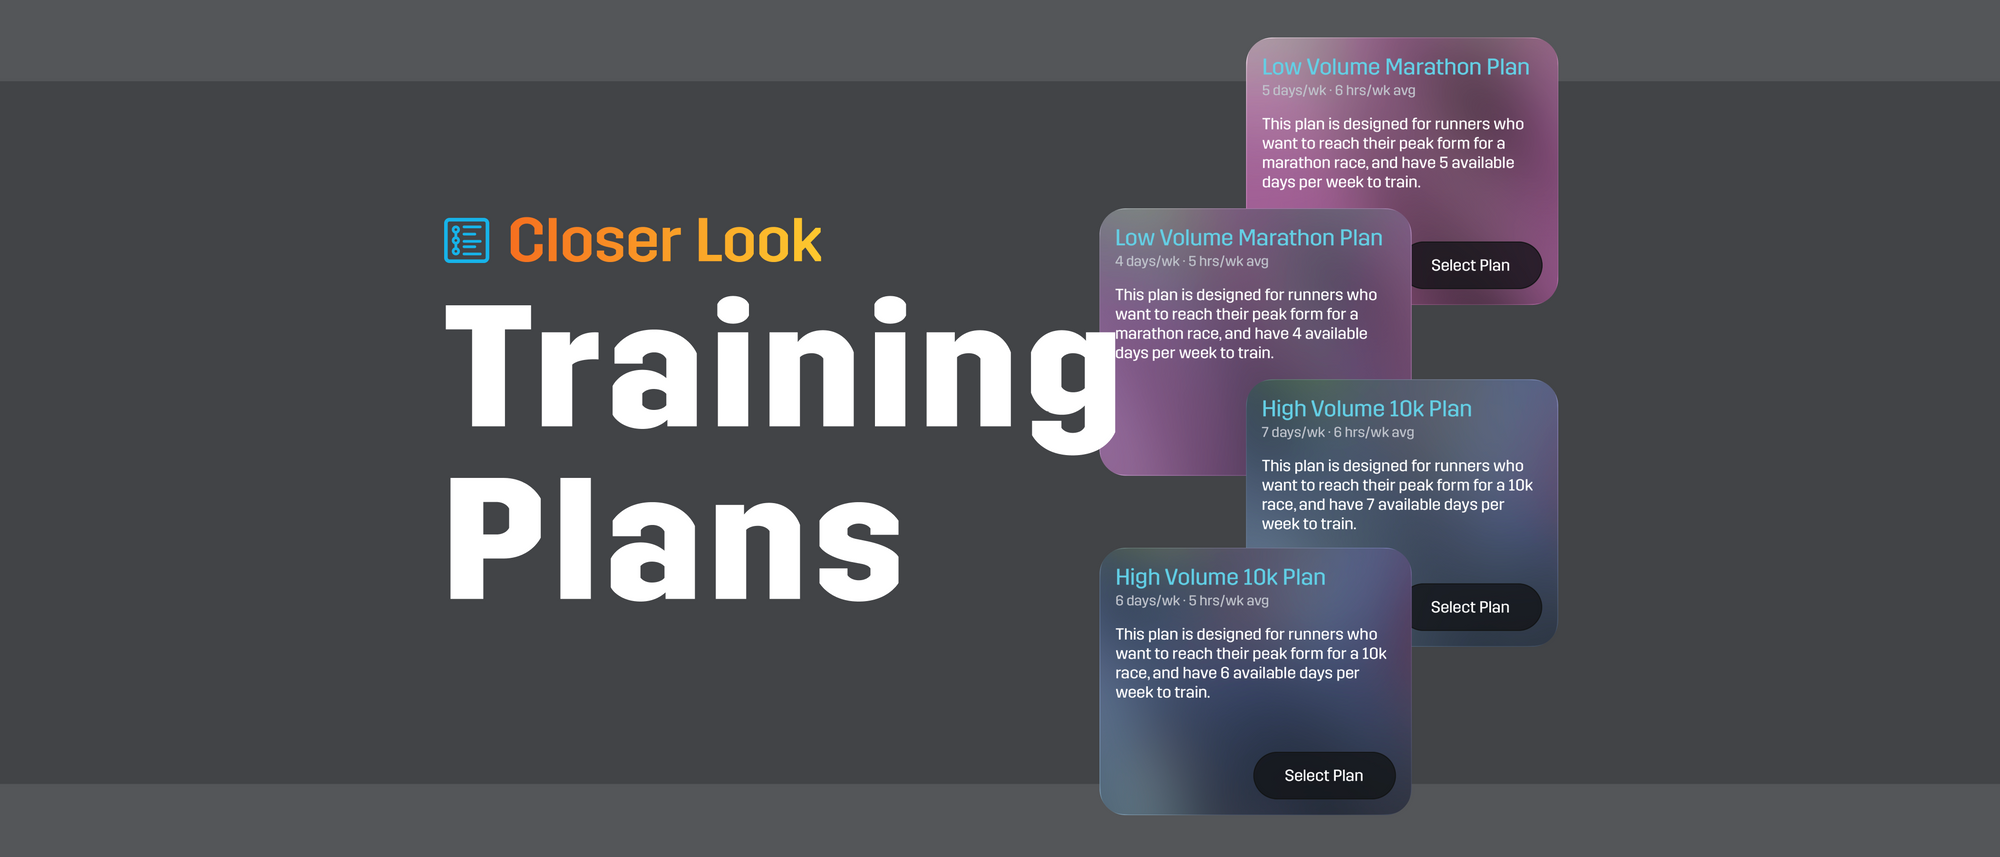 Closer Look | 8 new power-based training plans to fit your capability & schedule